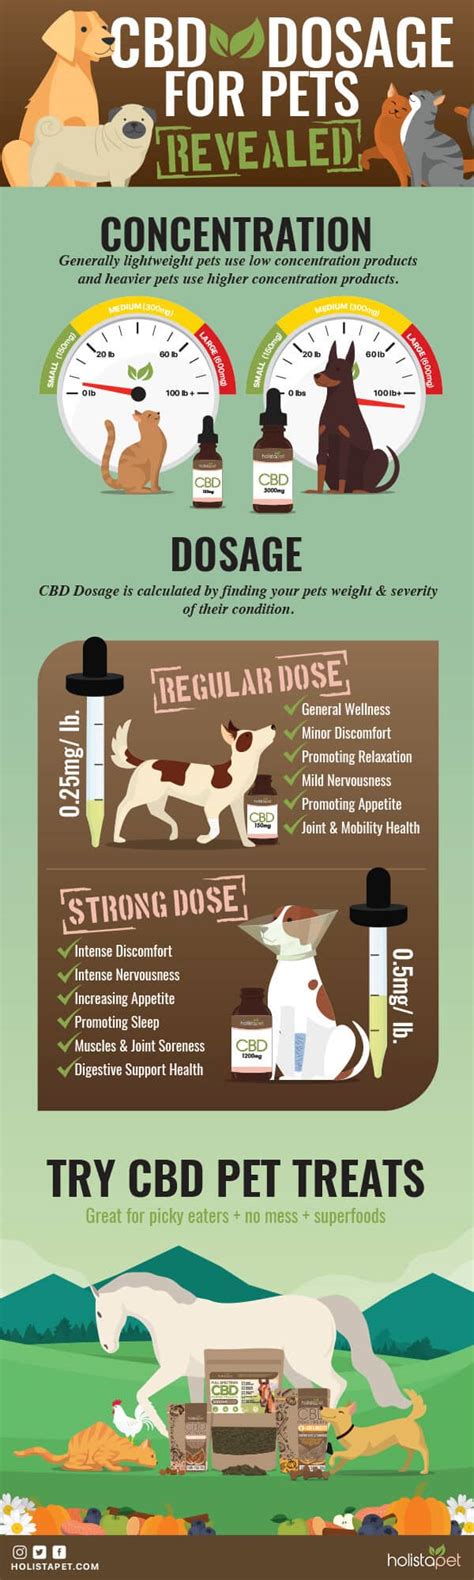  To determine when and how much CBD oil to give your pup for physical issues, start with a low dose, monitor their progress, and adjust accordingly